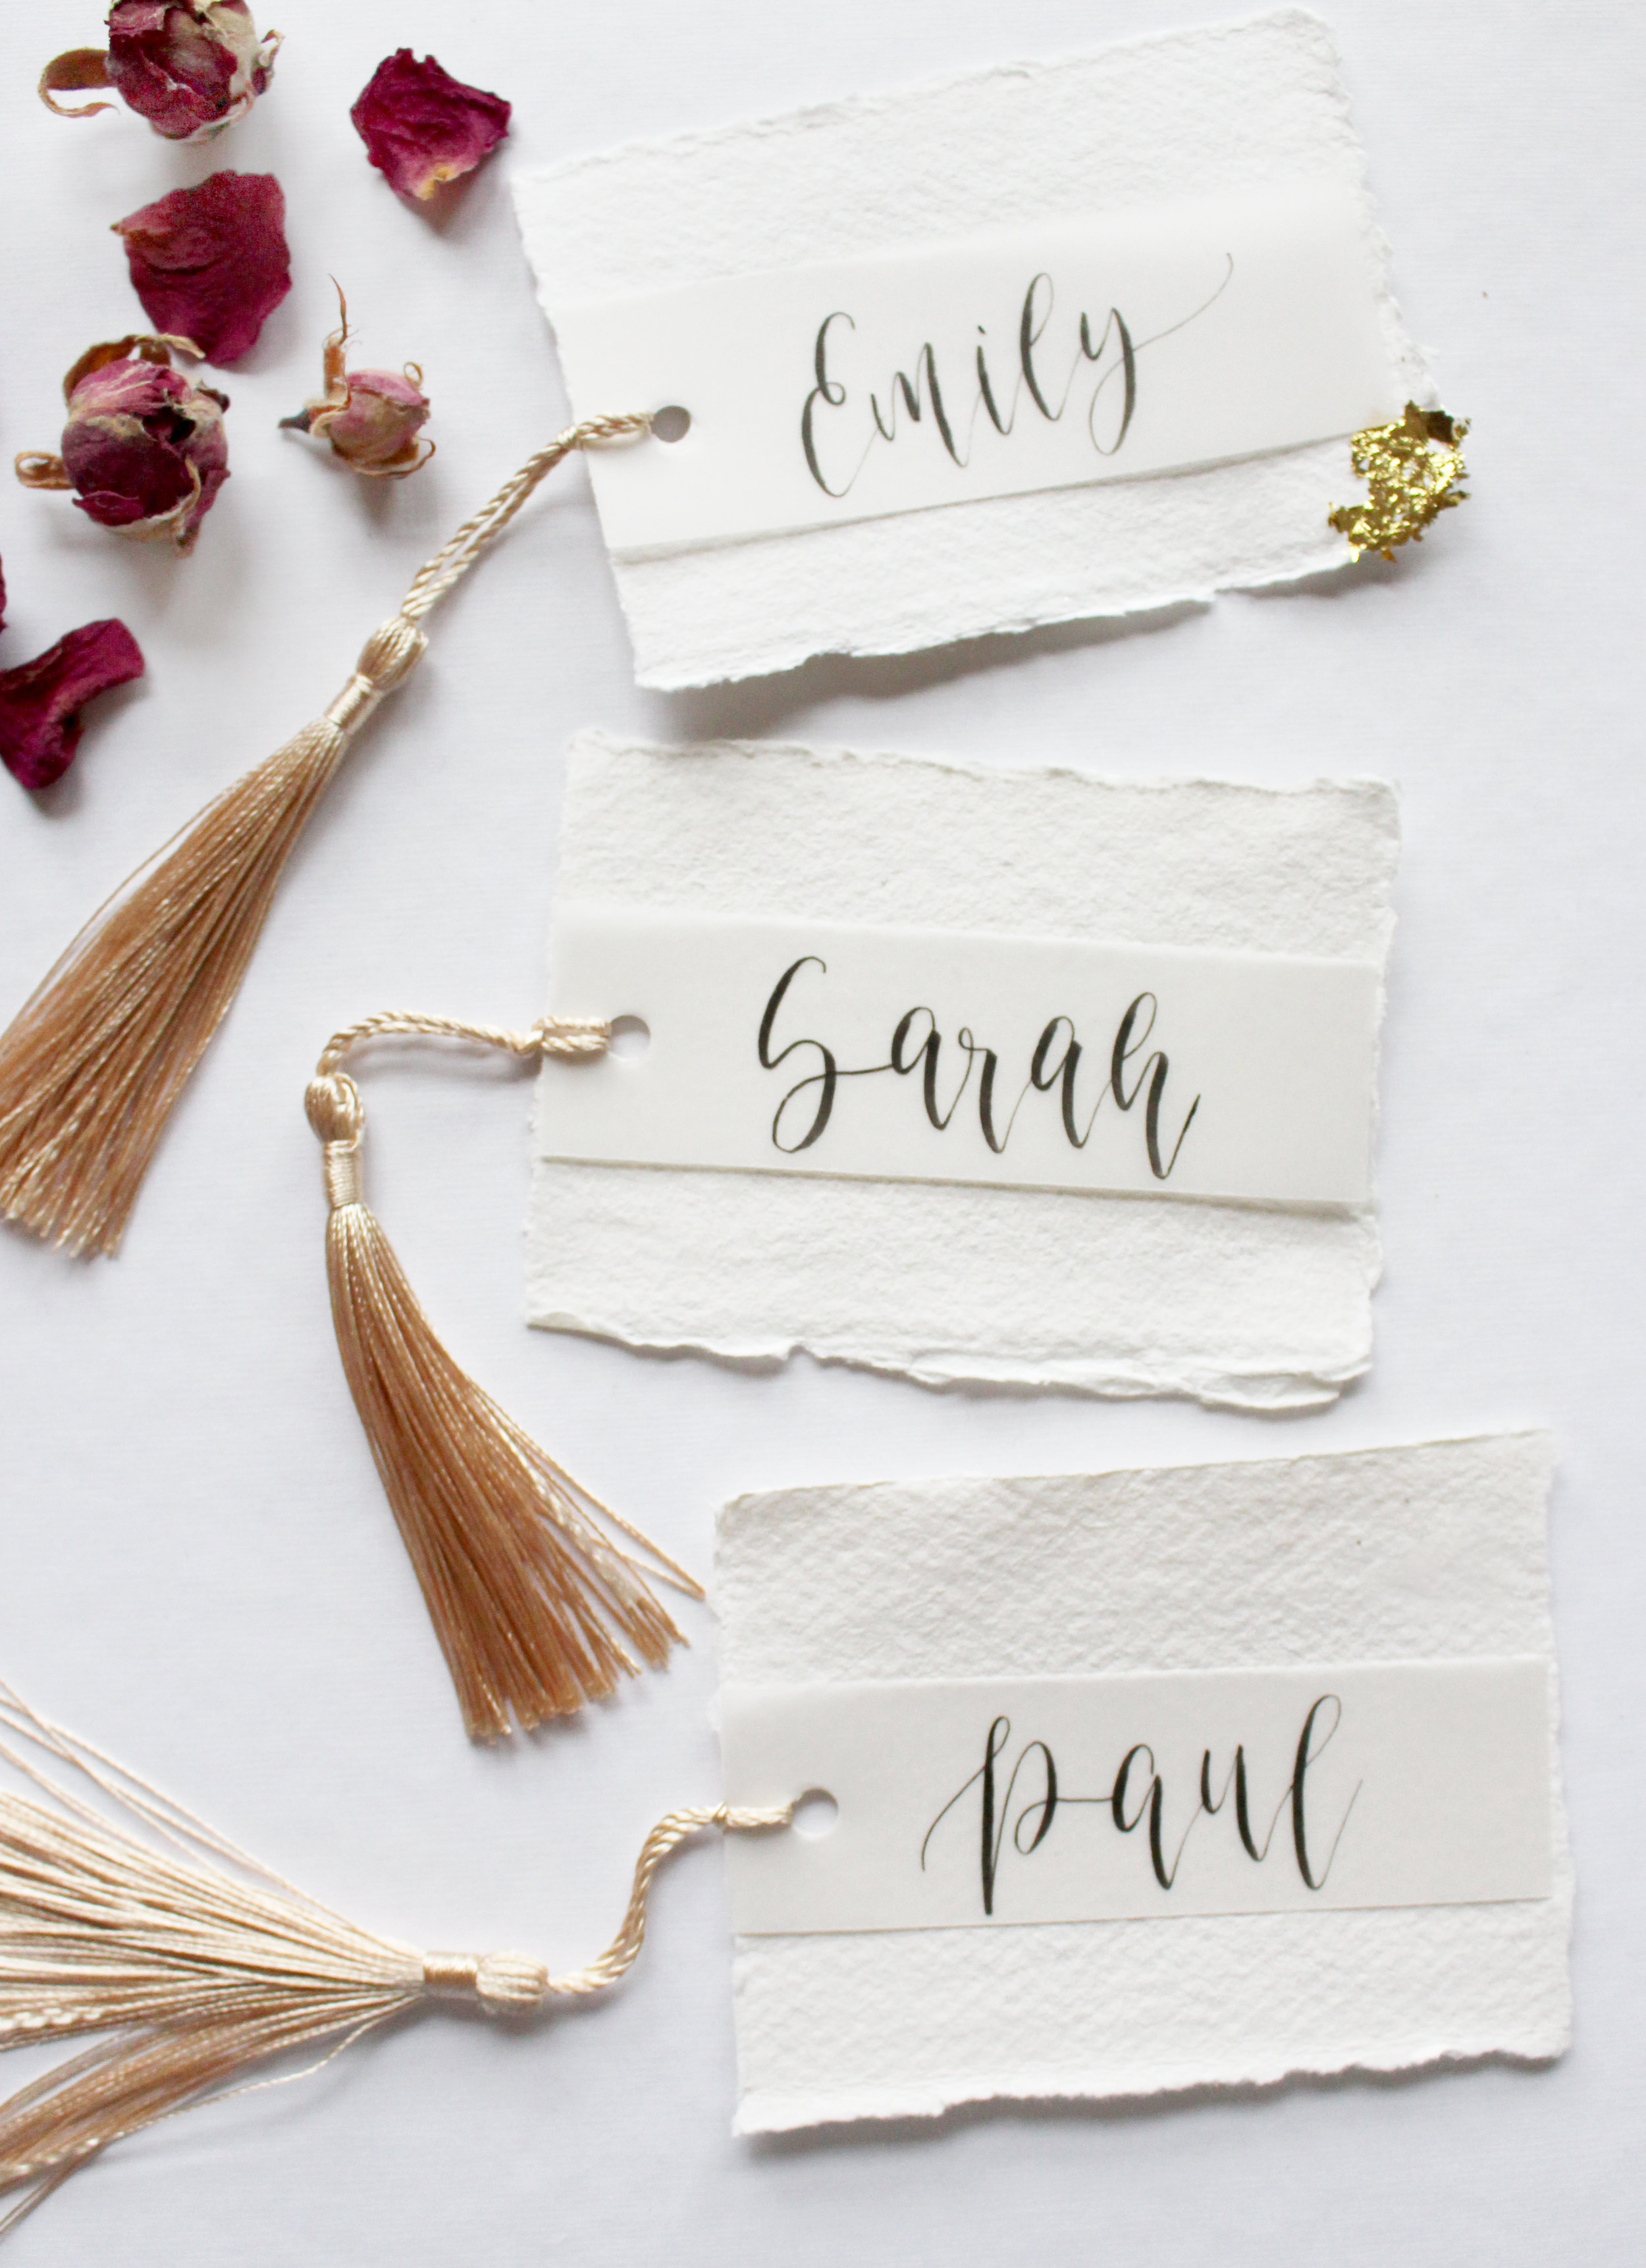 Name Place Cards Kraft Luggage Tags Lettering Wedding Name Cards Modern Calligraphy Rustic Calligraphy Name Cards Wedding Stationery